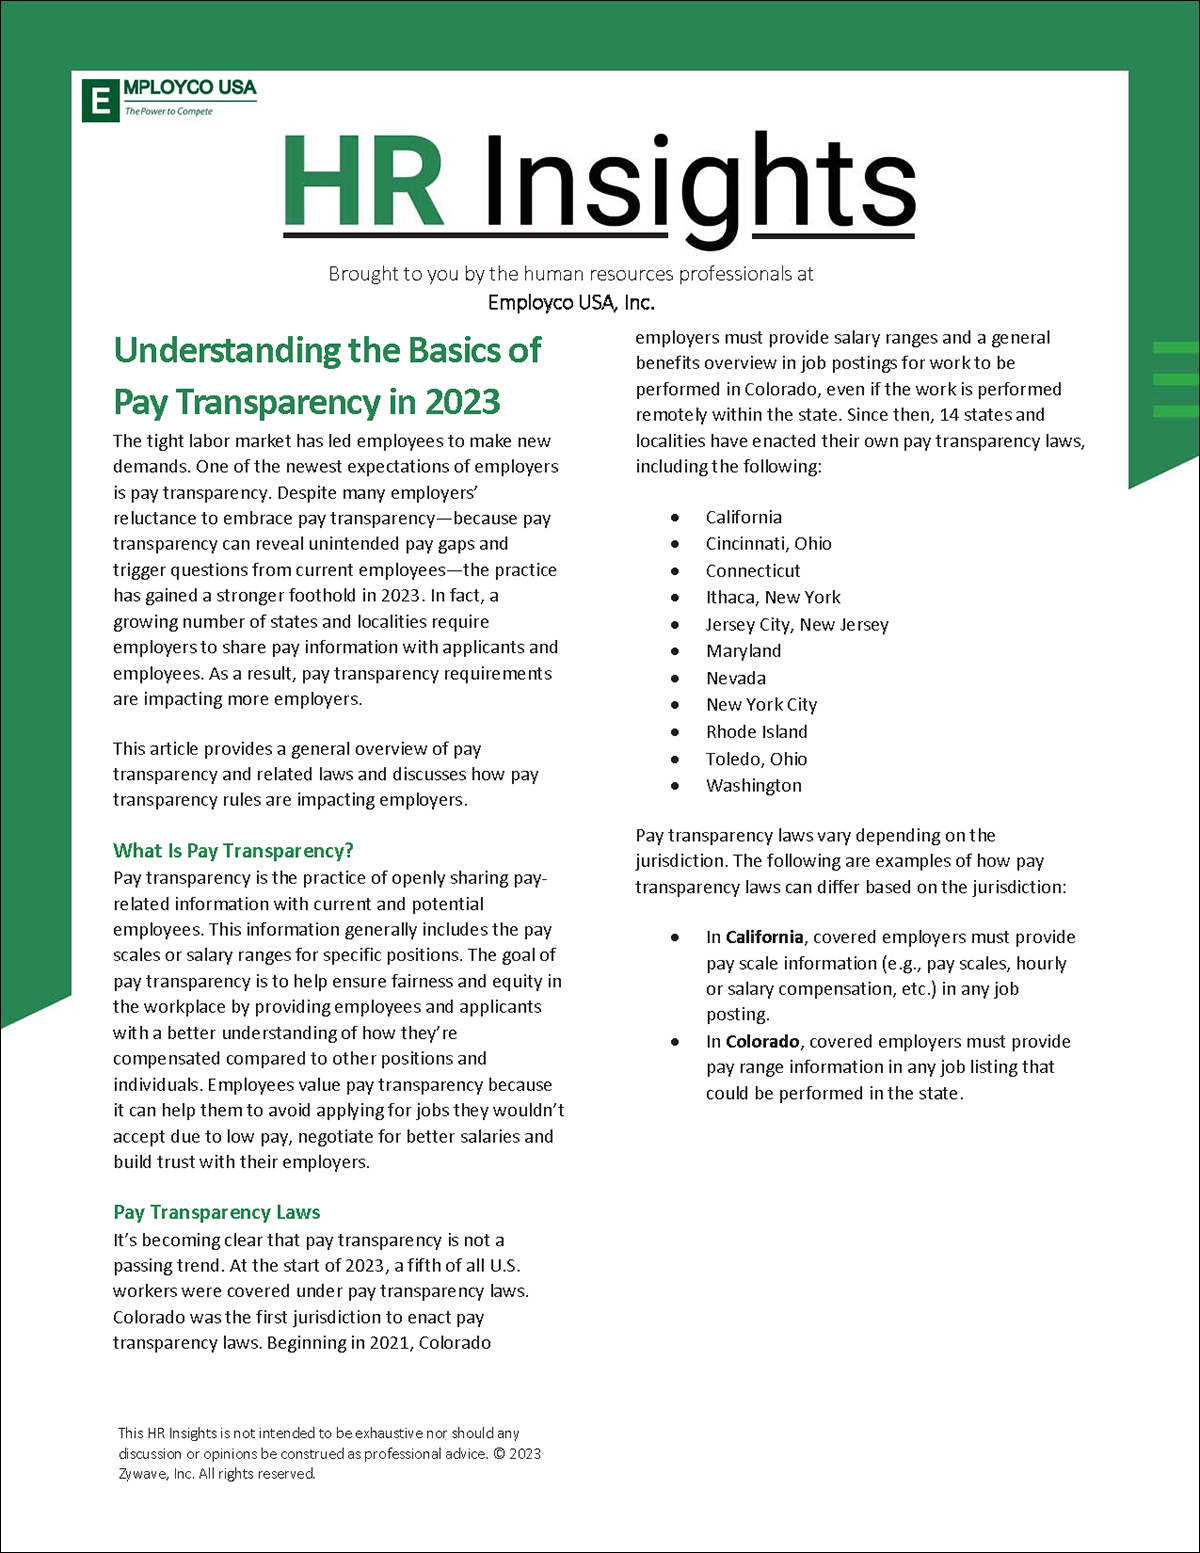 HR Insights – Understanding the Basics of Pay Transparency in 2023